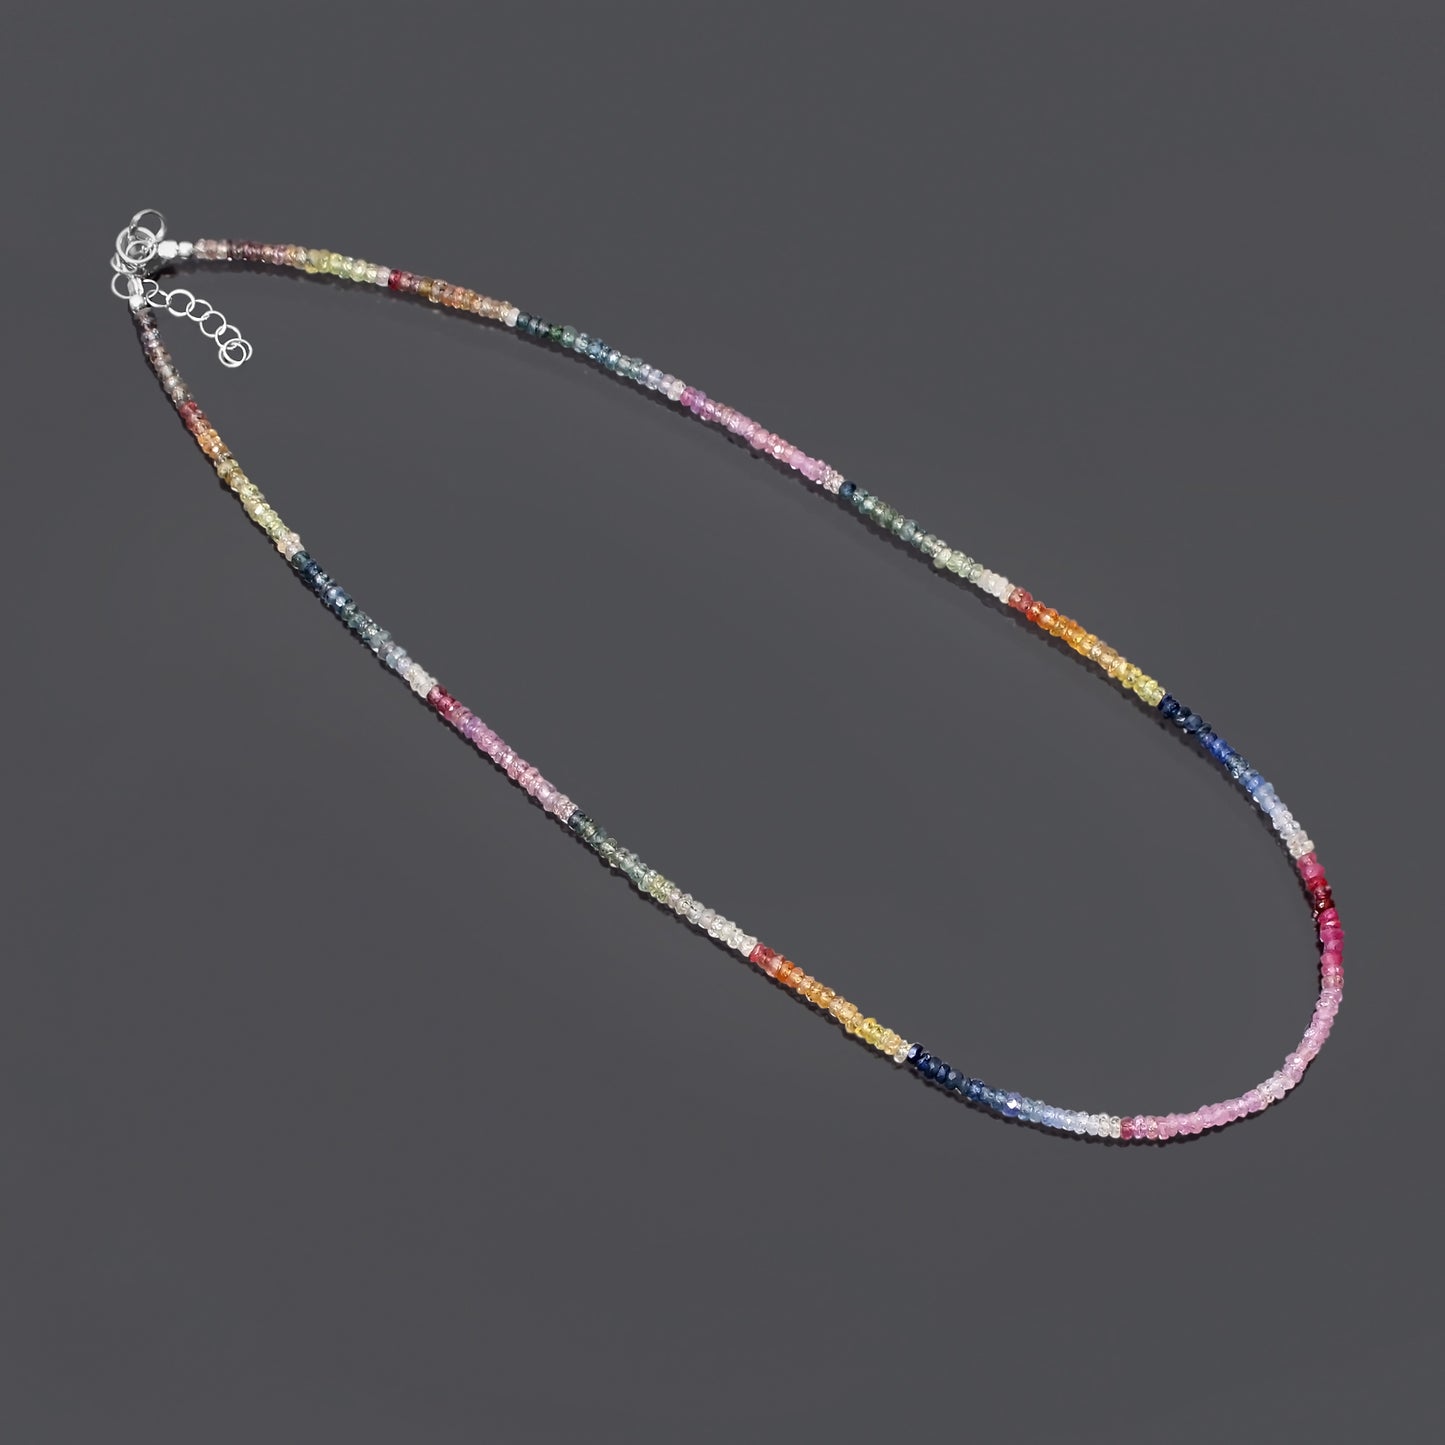 Necklace : Multi-Sapphire Faceted Rondelle with Silver Clasp.